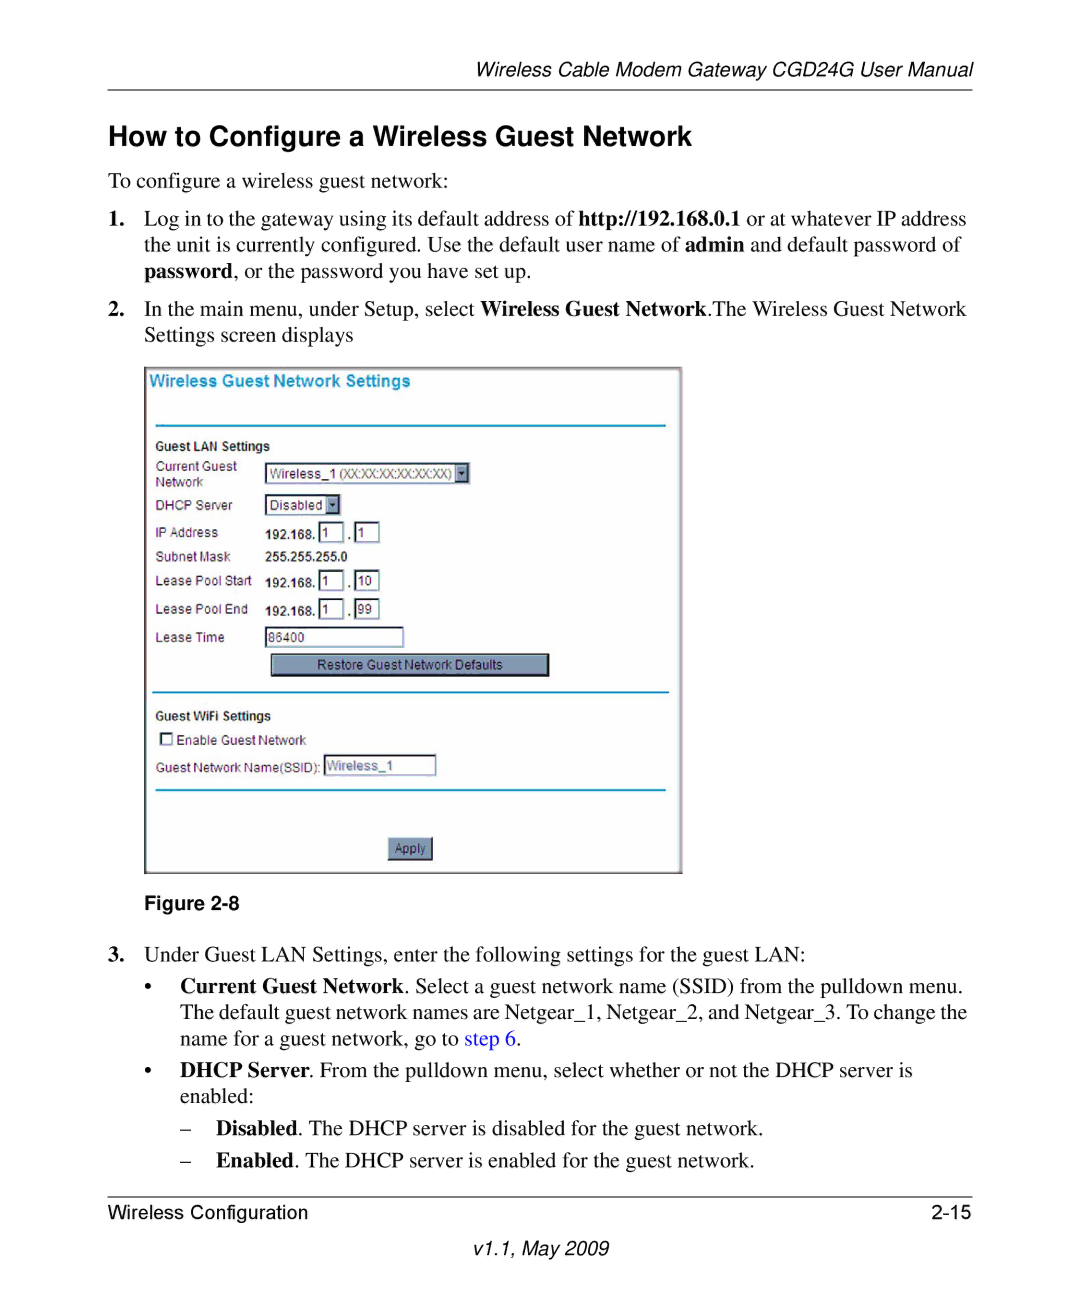 Gateway CGD24G user manual How to Configure a Wireless Guest Network 